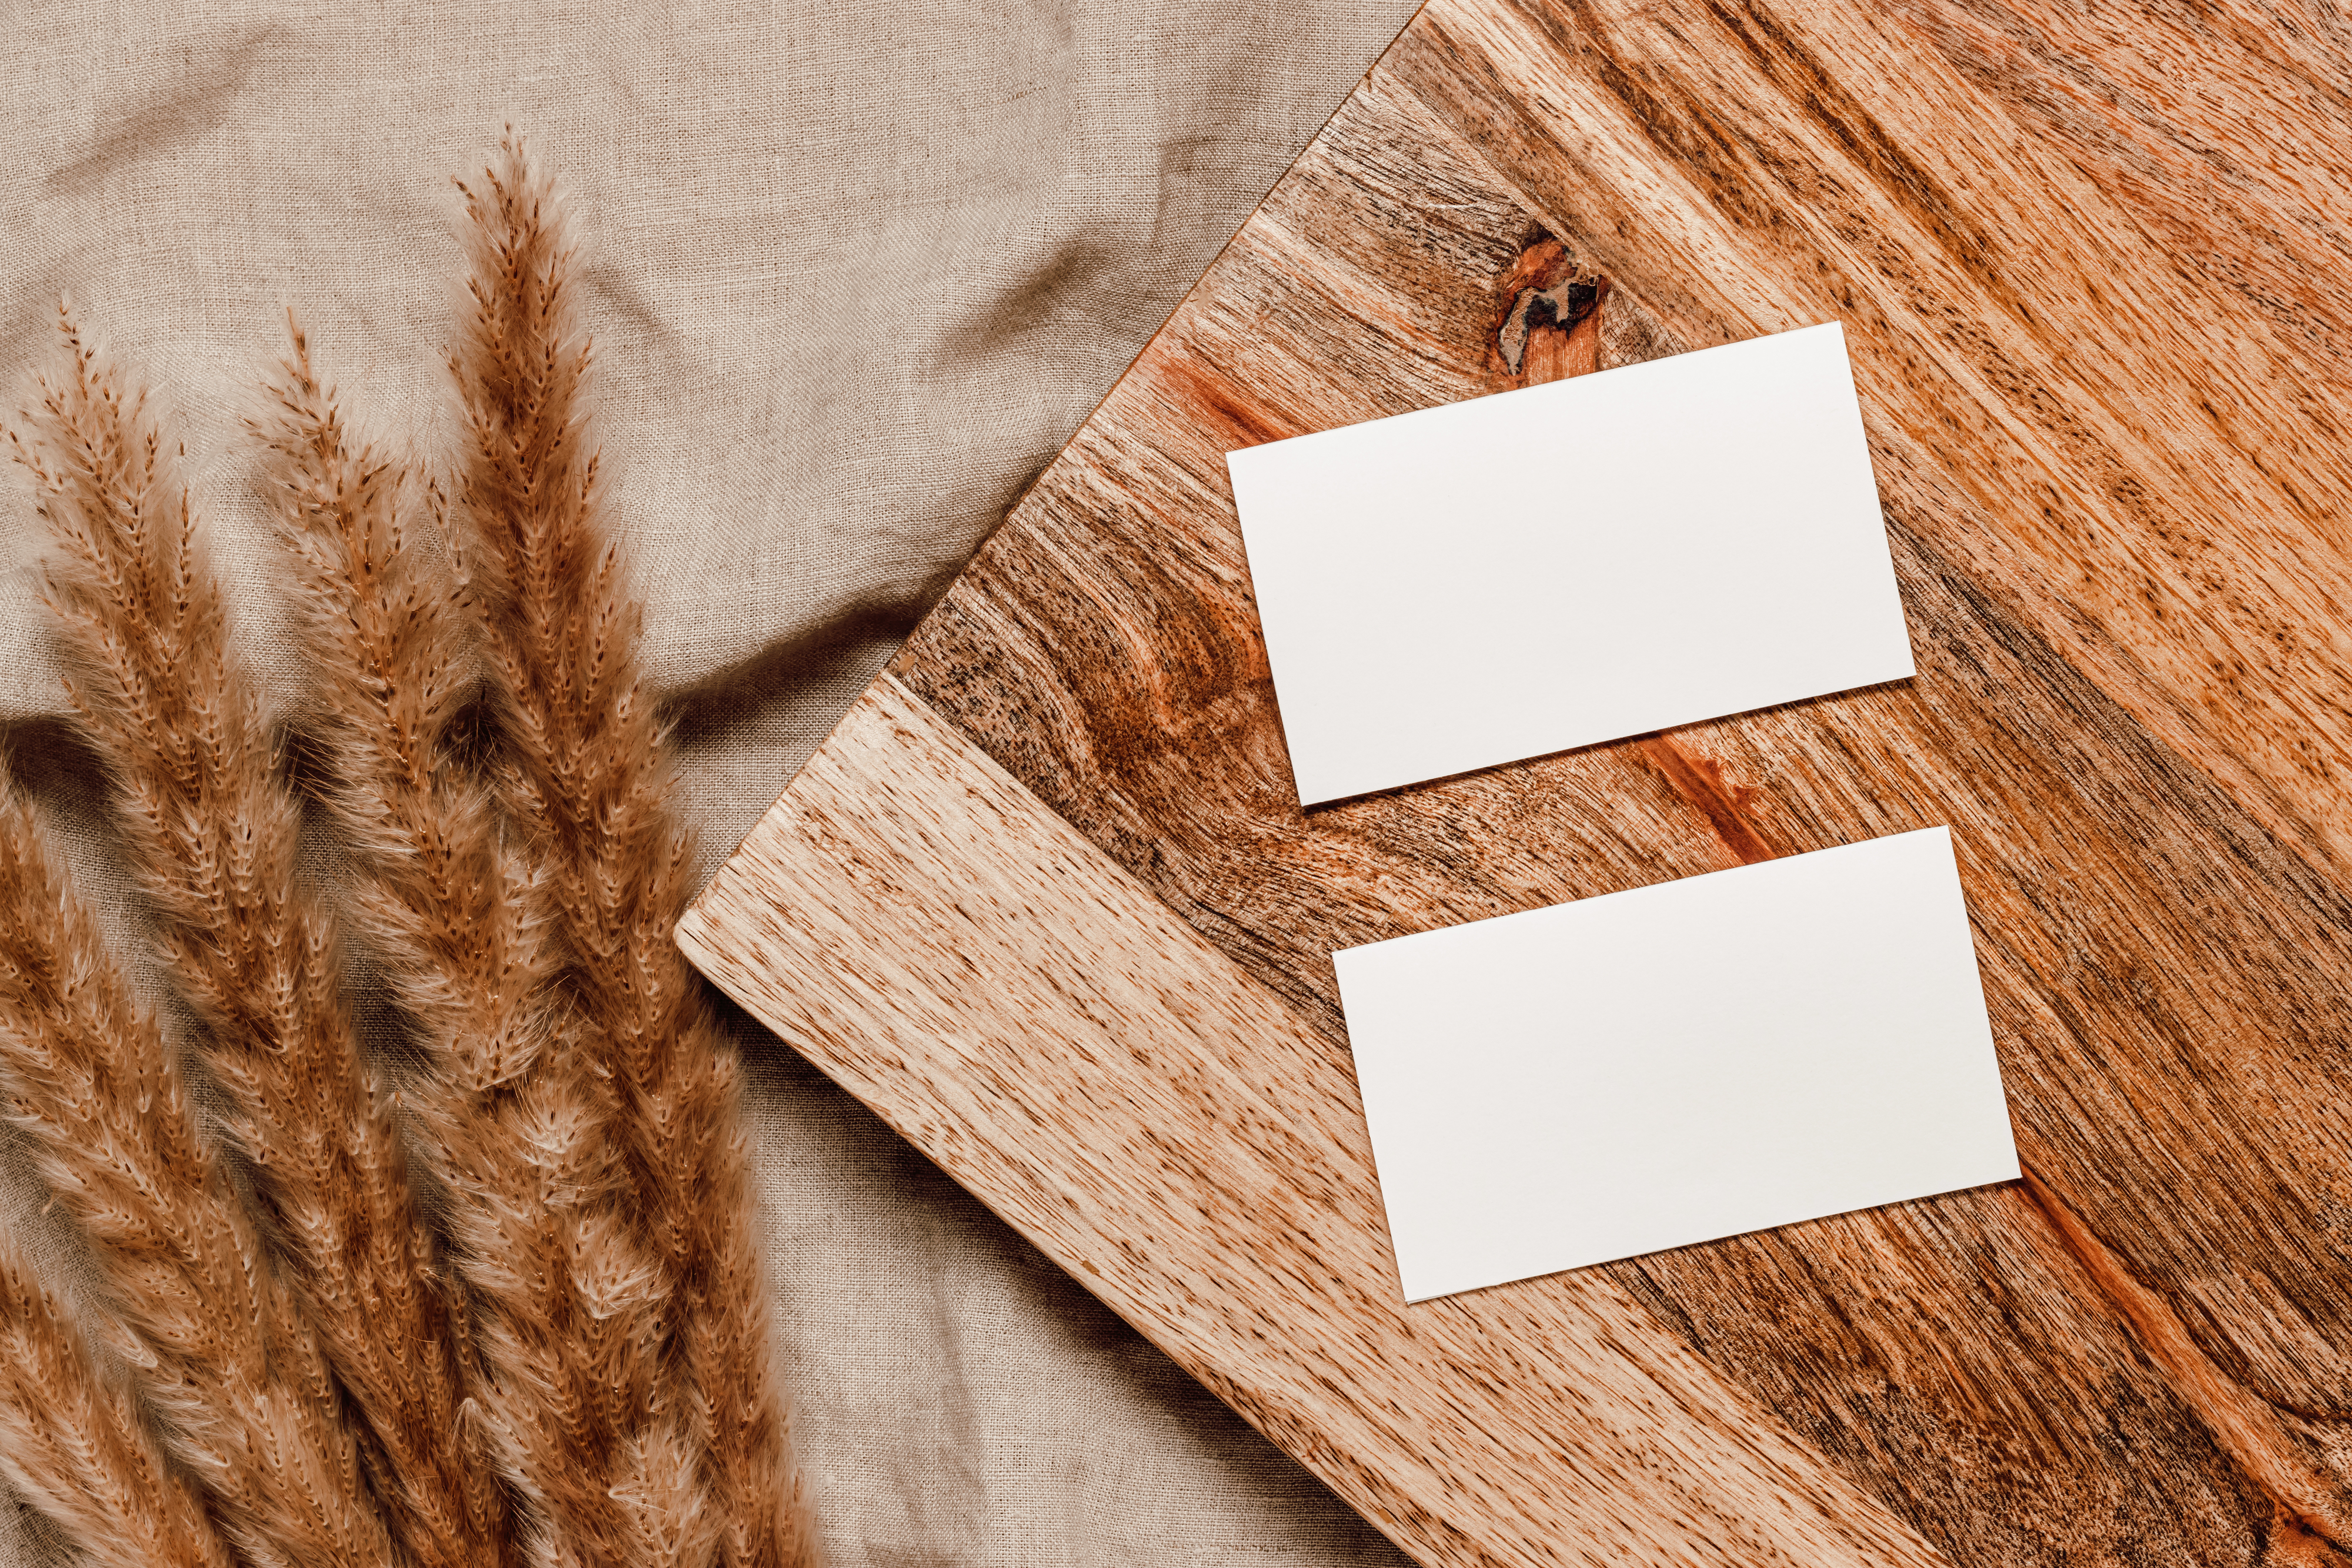 Two blank white cards, the size of credit cards, sit on a piece of dark wood. The wood is on top of a beige sheet with a bunch of dried wheat-like flowers next to it.